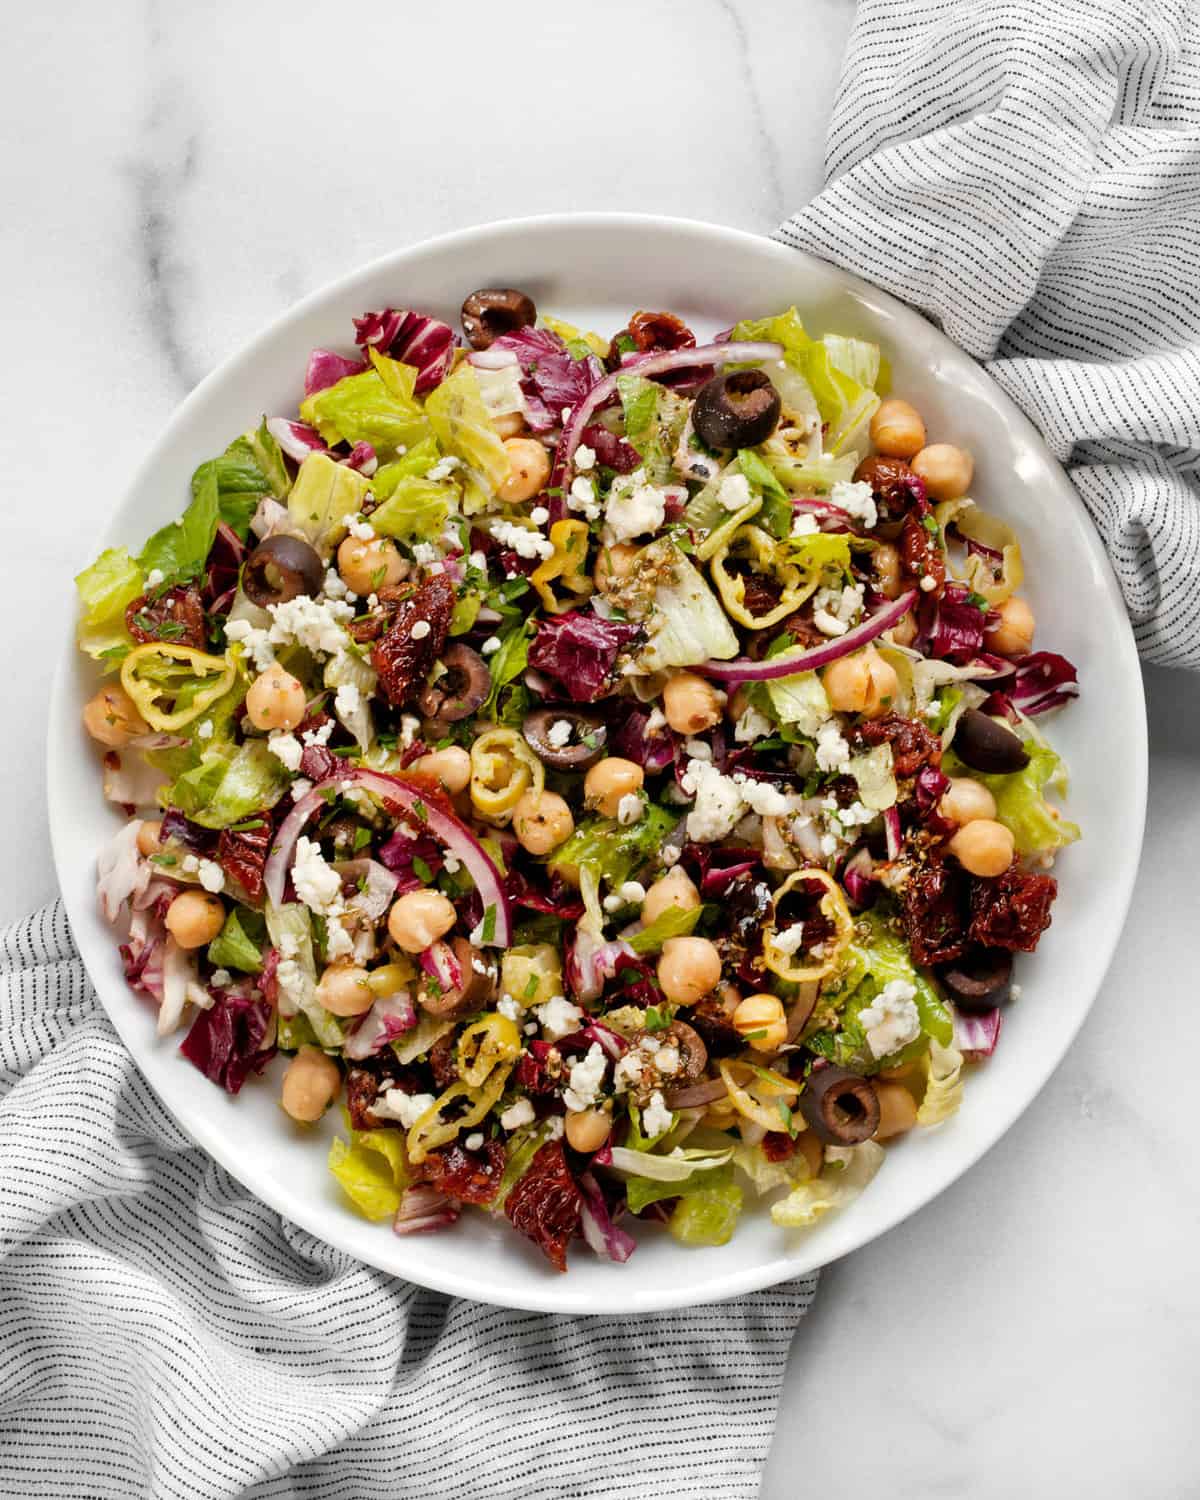 Chopped salad with chickpeas, romaine and radicchio on a plate.